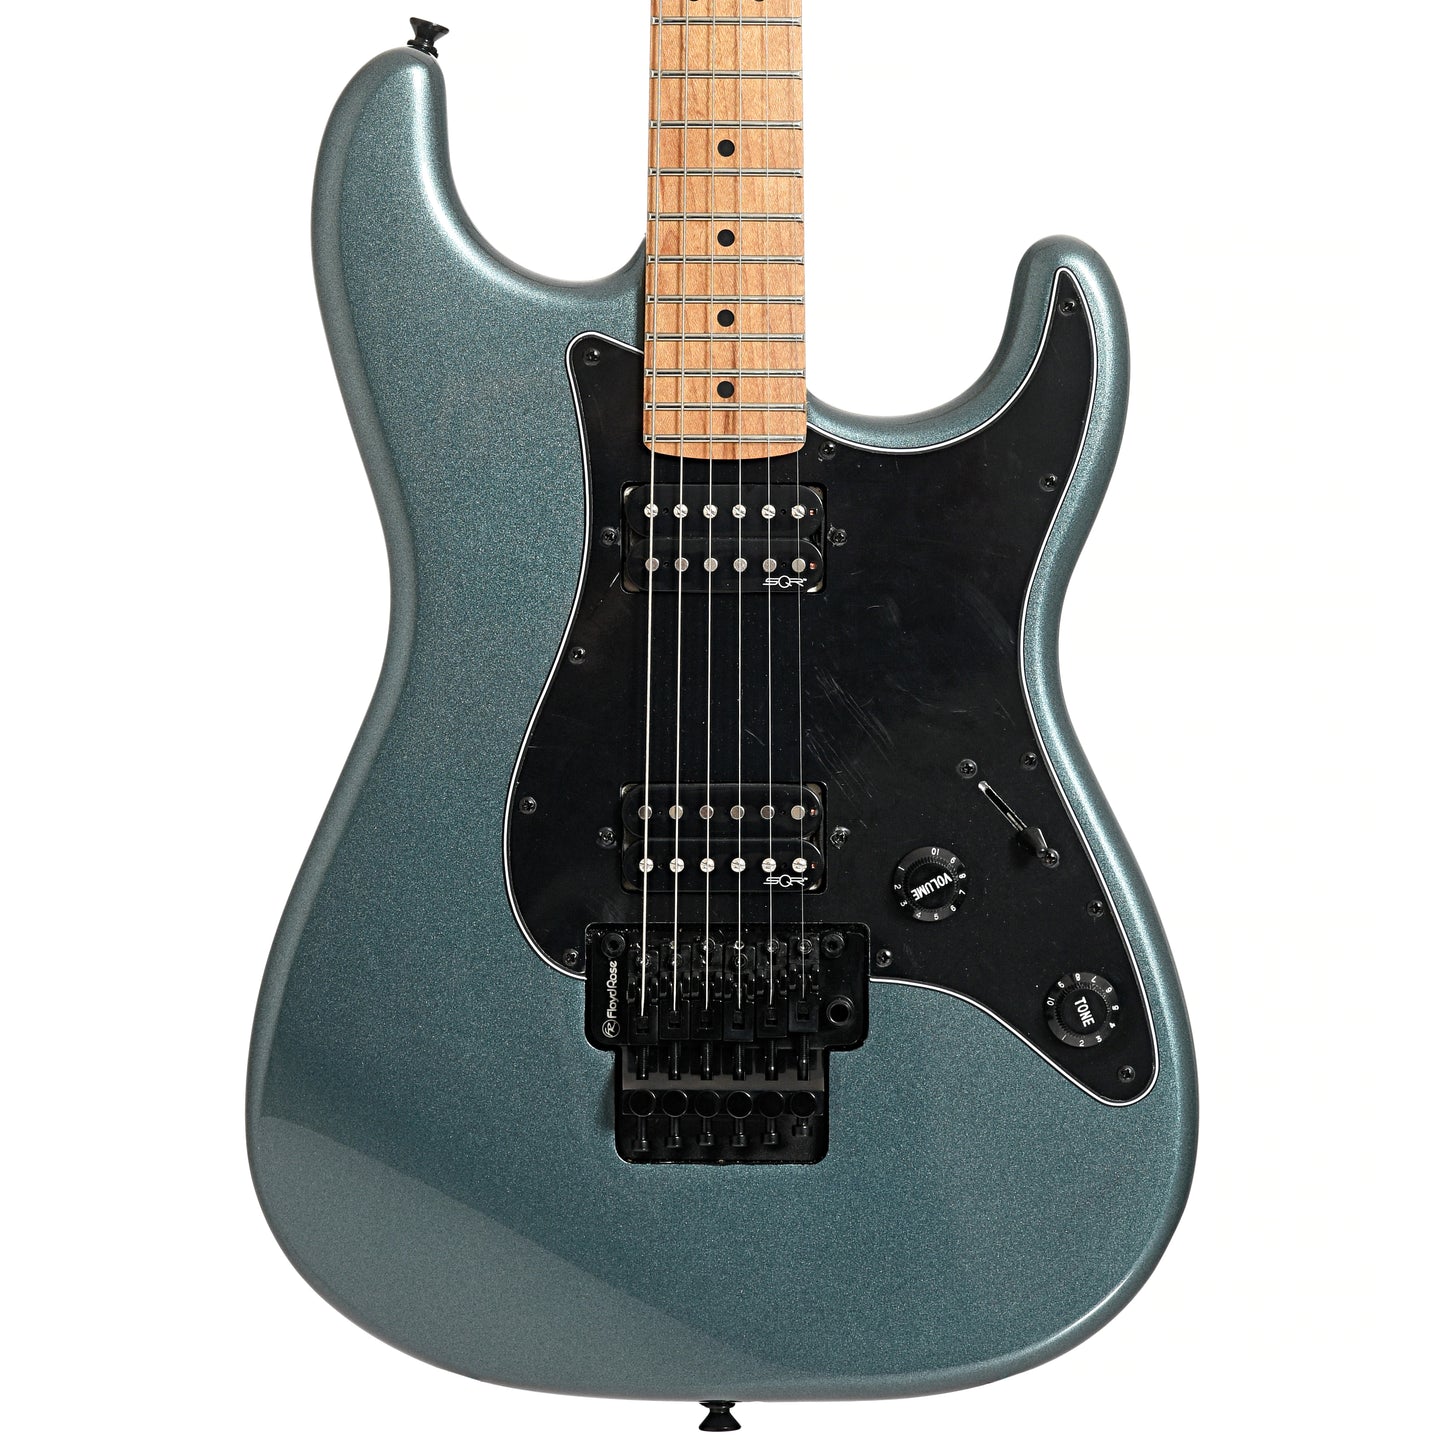 Image 2 of Squier Contemporary Stratocaster HH FR, Gunmetal Metallic - SKU# SCSHHFR : Product Type Solid Body Electric Guitars : Elderly Instruments